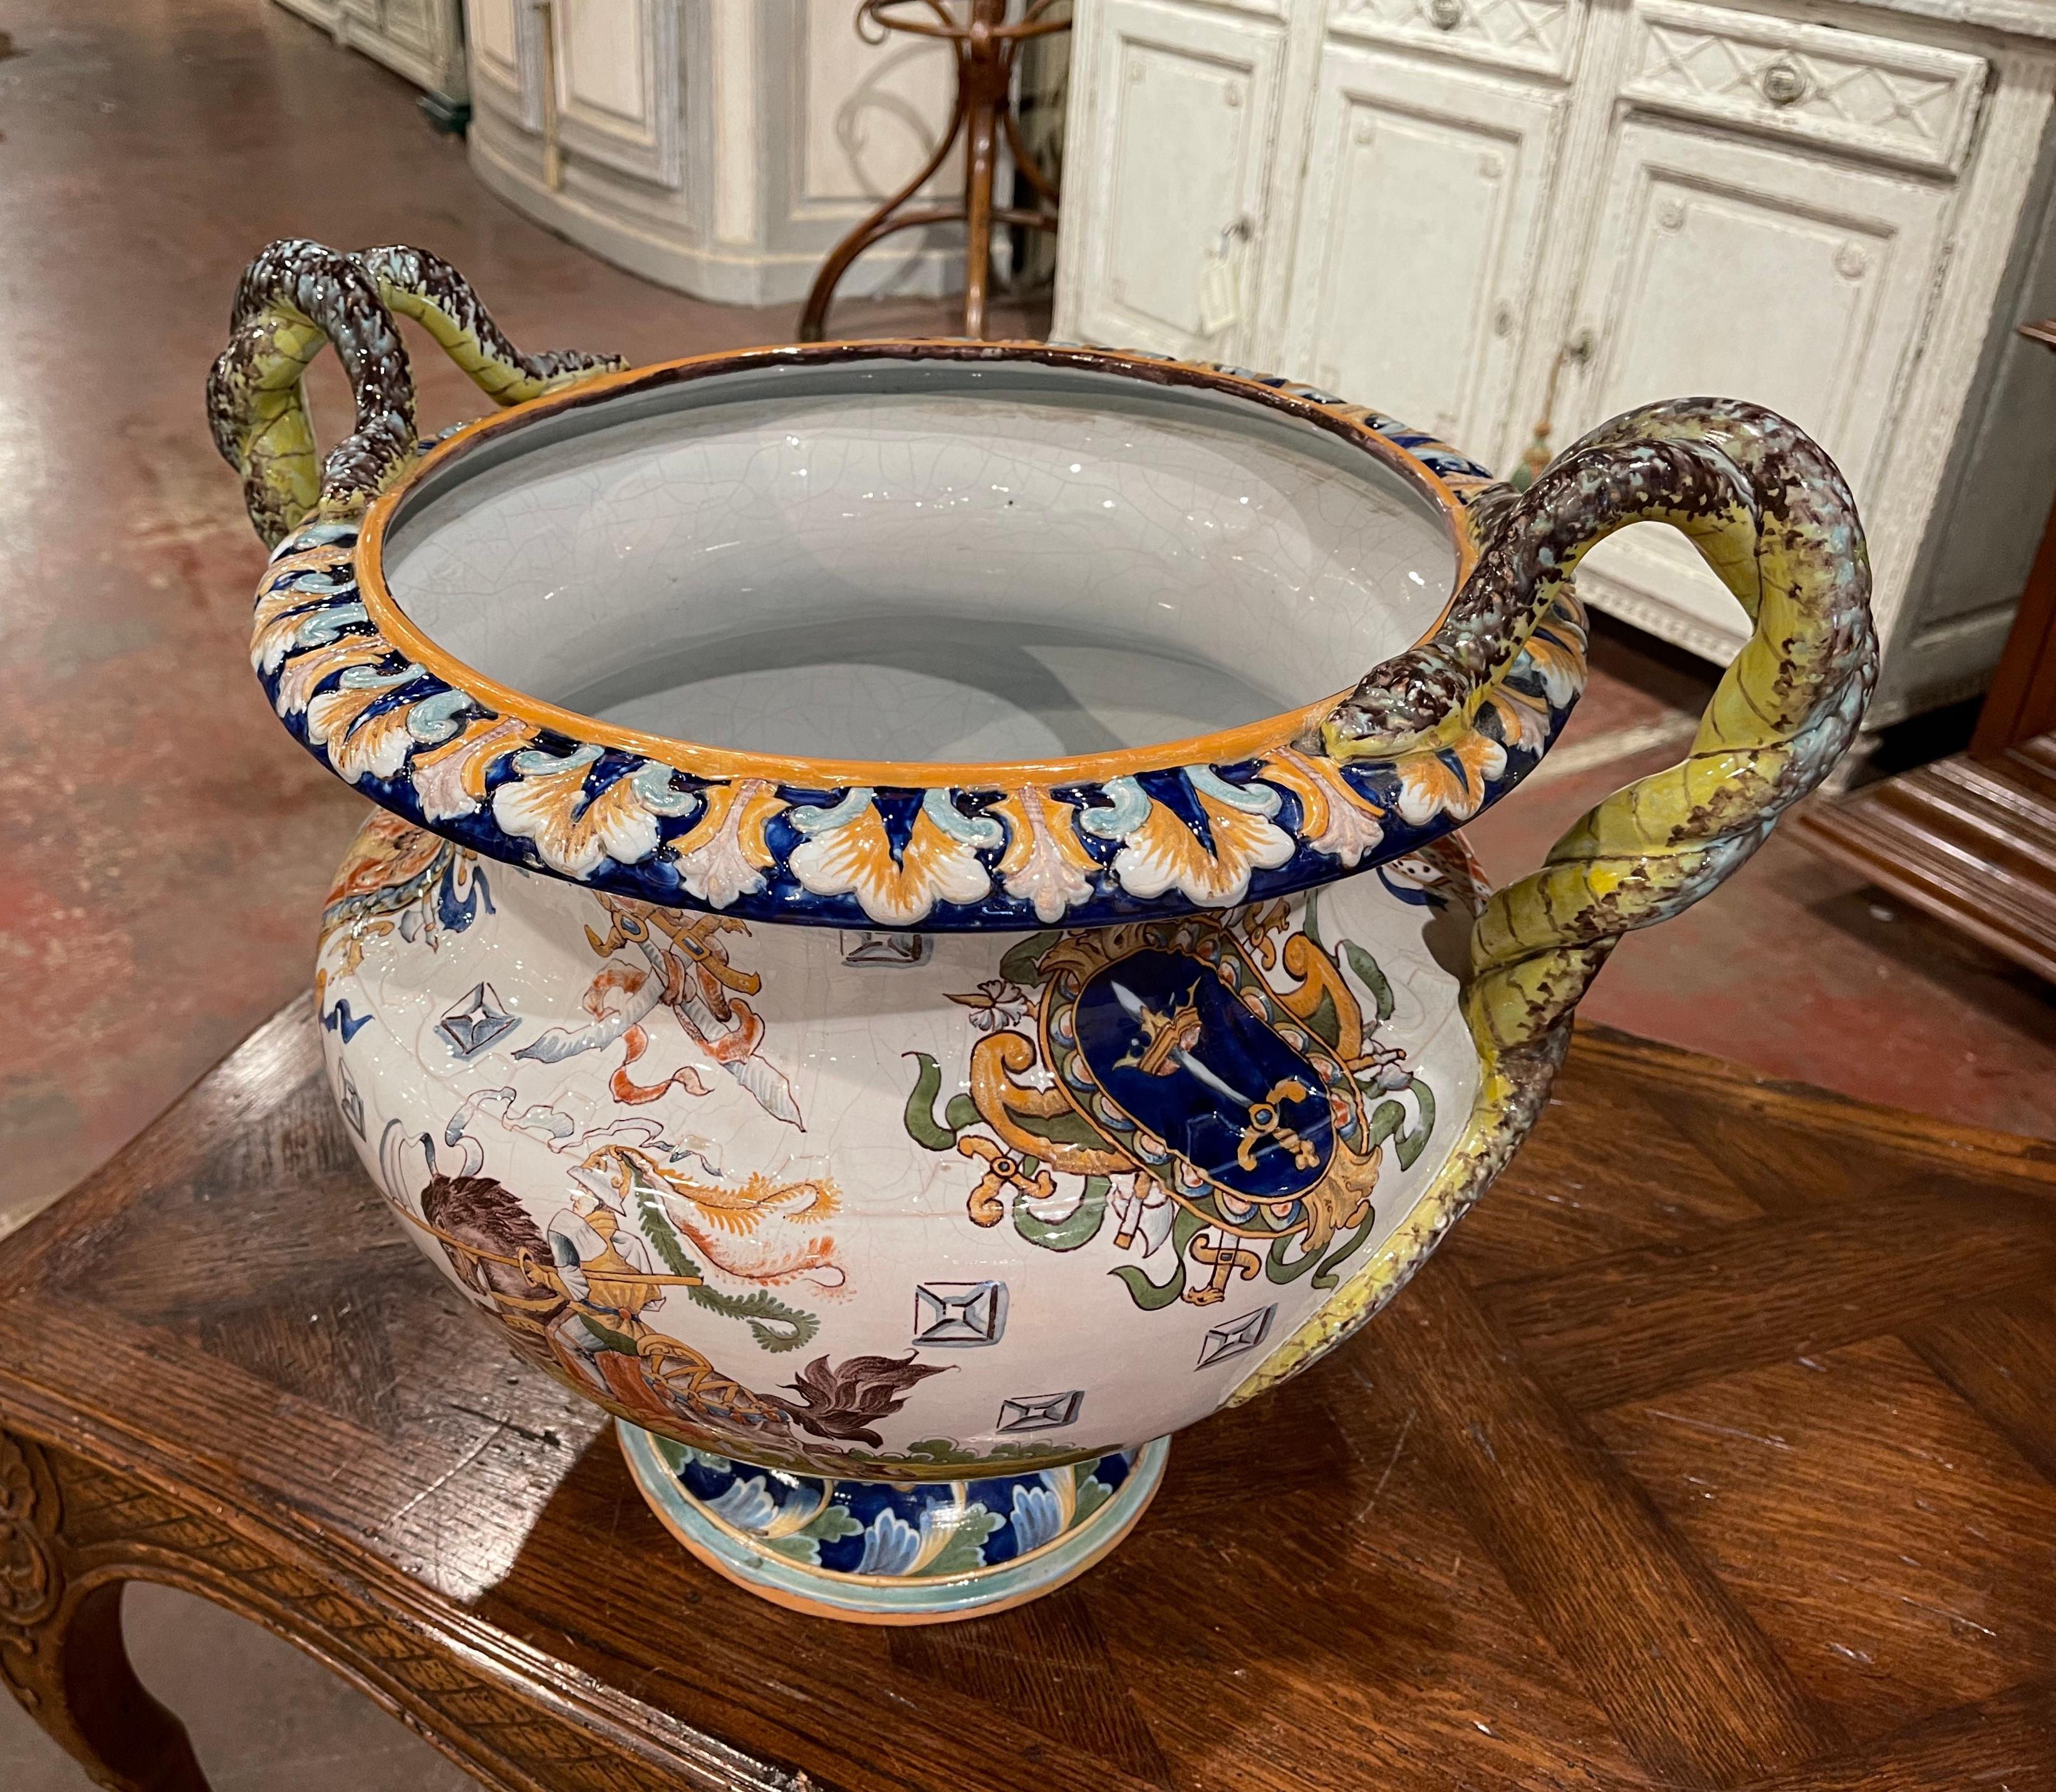 Created in France circa 1890 and attributed to Gien, the antique planter is round in shape and stands on a circular base decorated with acanthus leaf motifs. The large cache pot features two twisted snake handles over the colorful rim and wide neck.